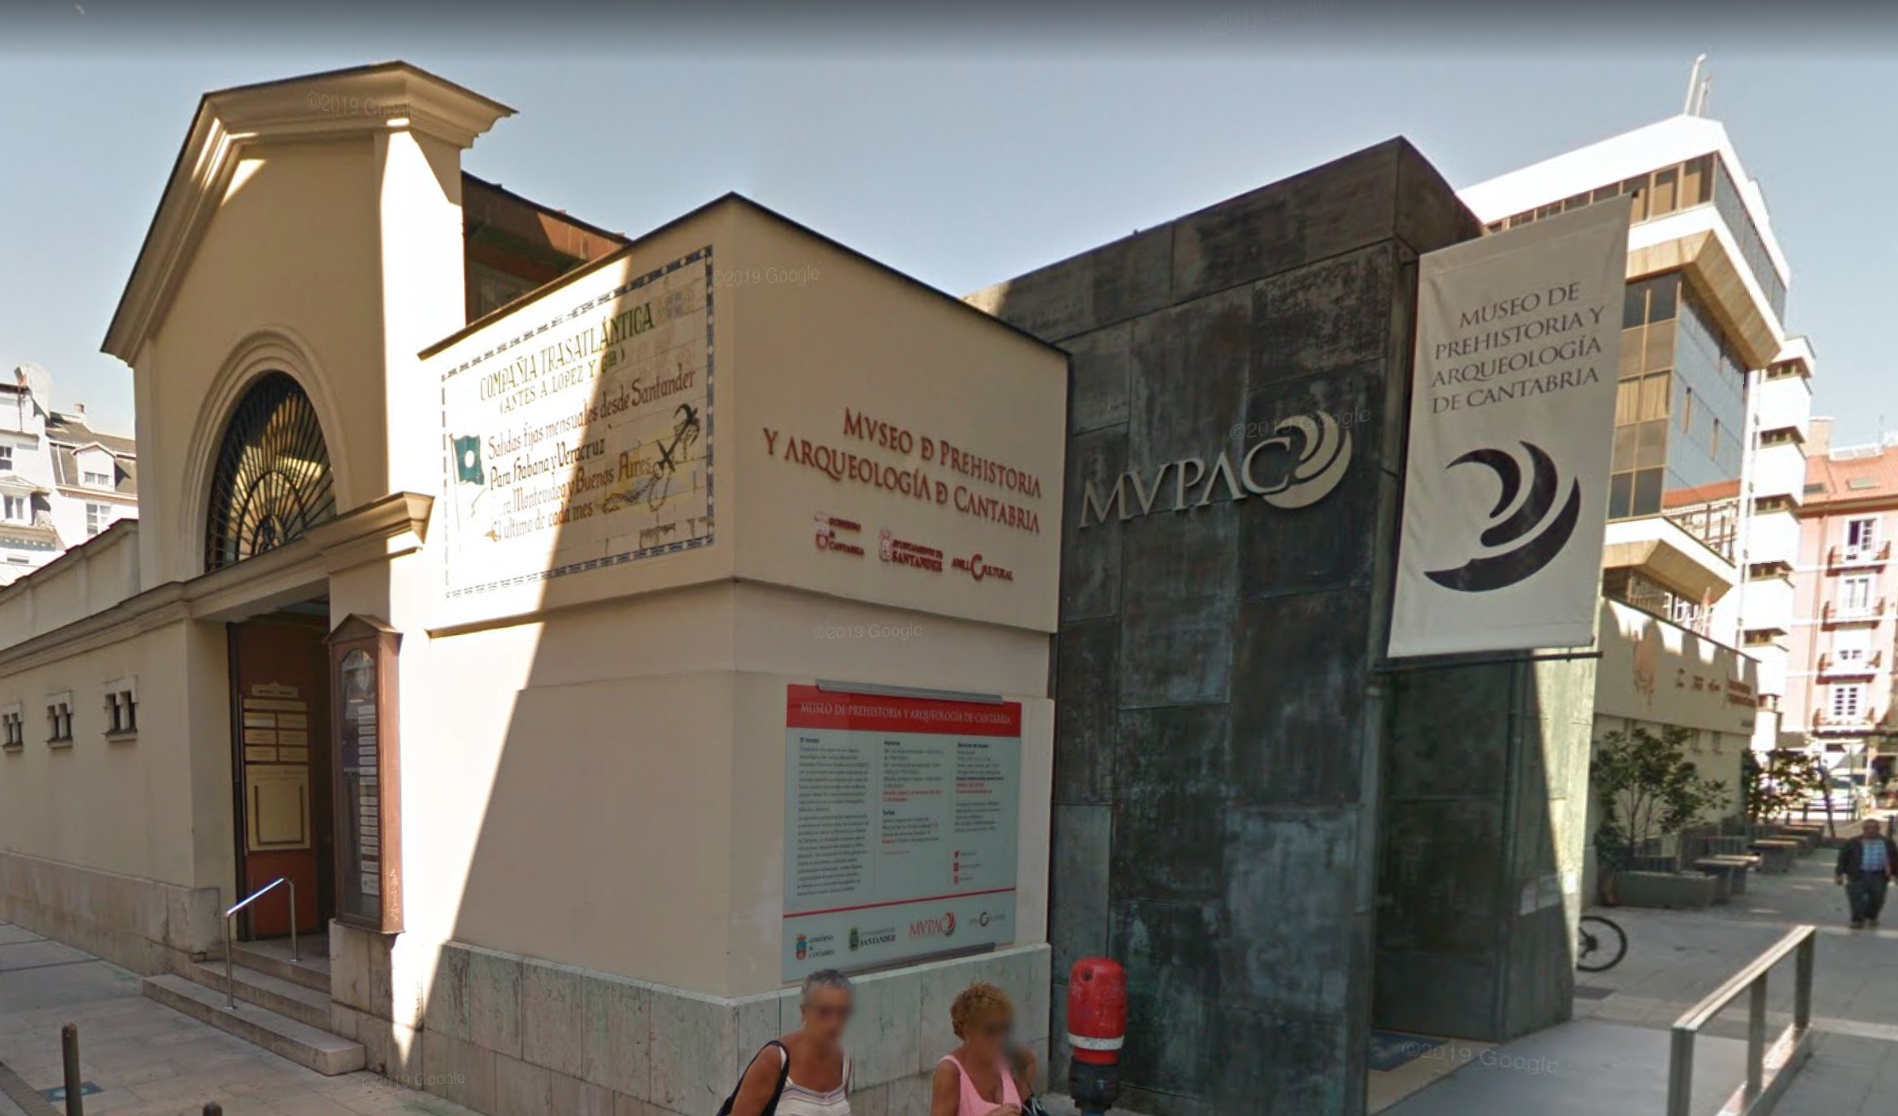 Museum of Prehistory and Archaeology of Cantabria by Google Earth